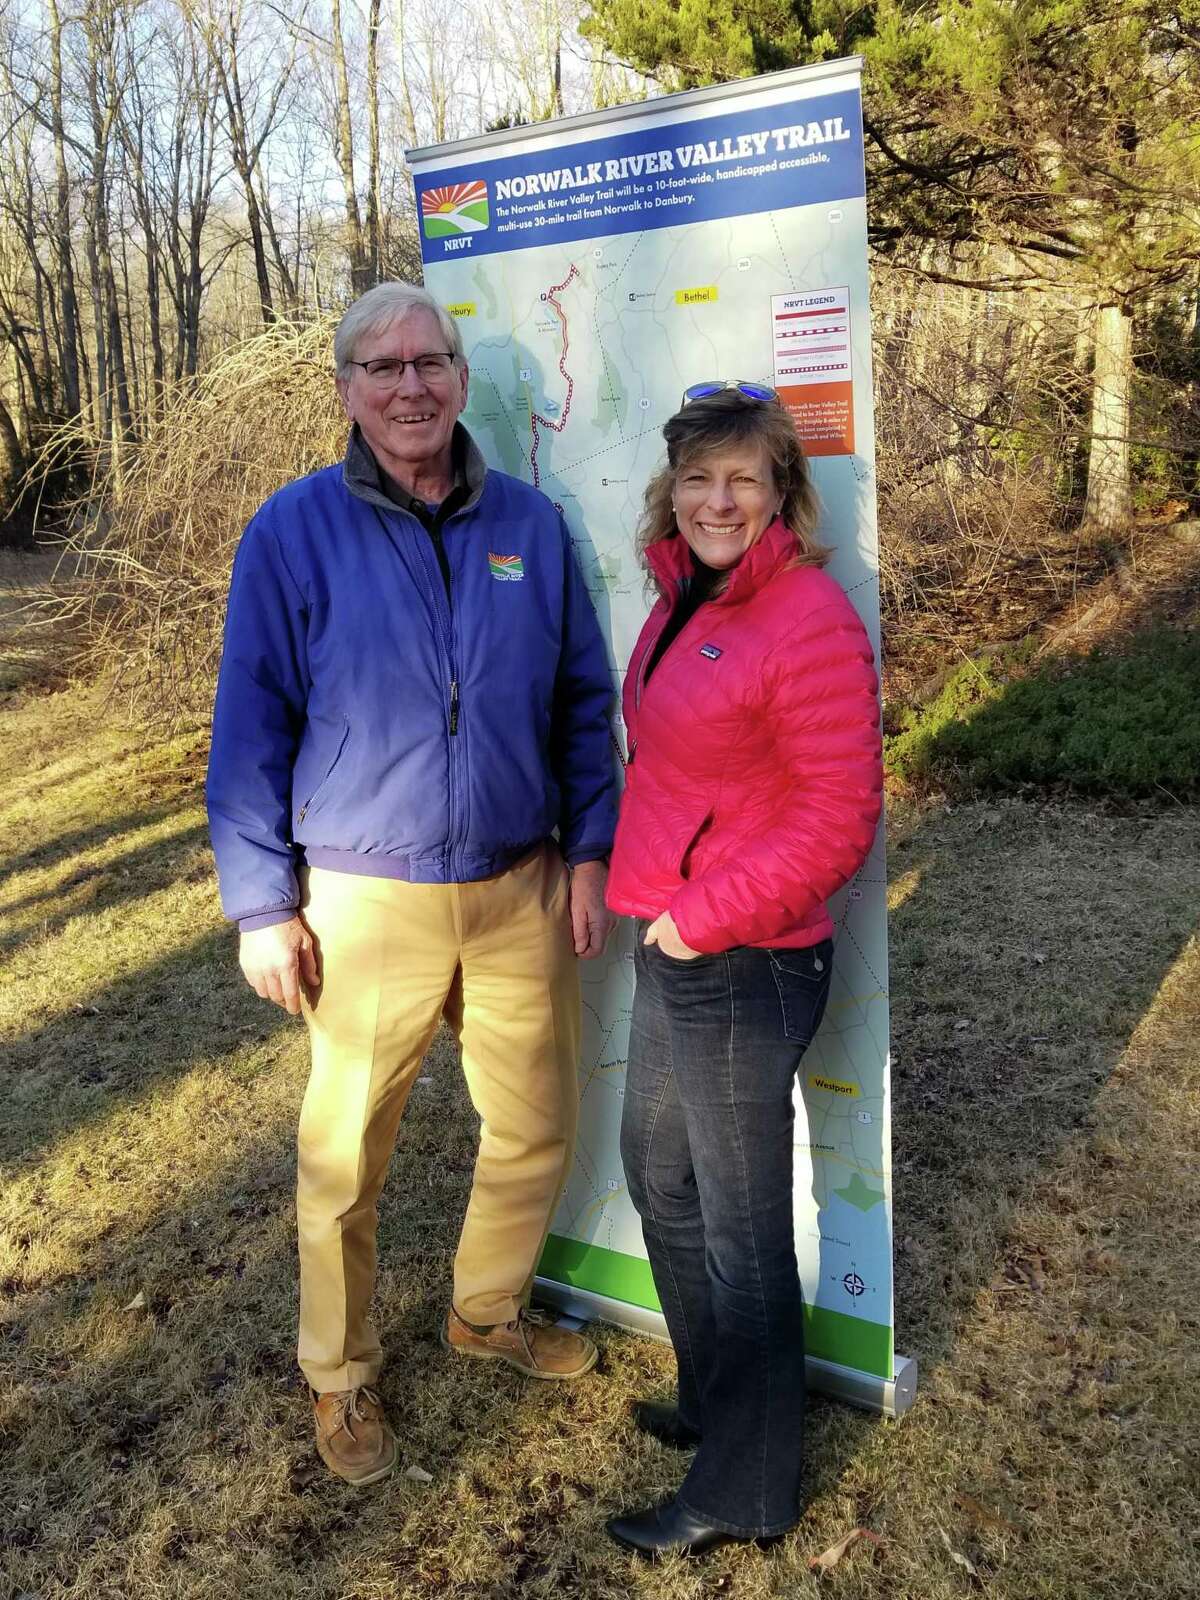 Charlie Taney, left, is the new president of the Norwalk River Valley Trail as Pat Sesto steps down from that position. Taney had been executive director of the trail.